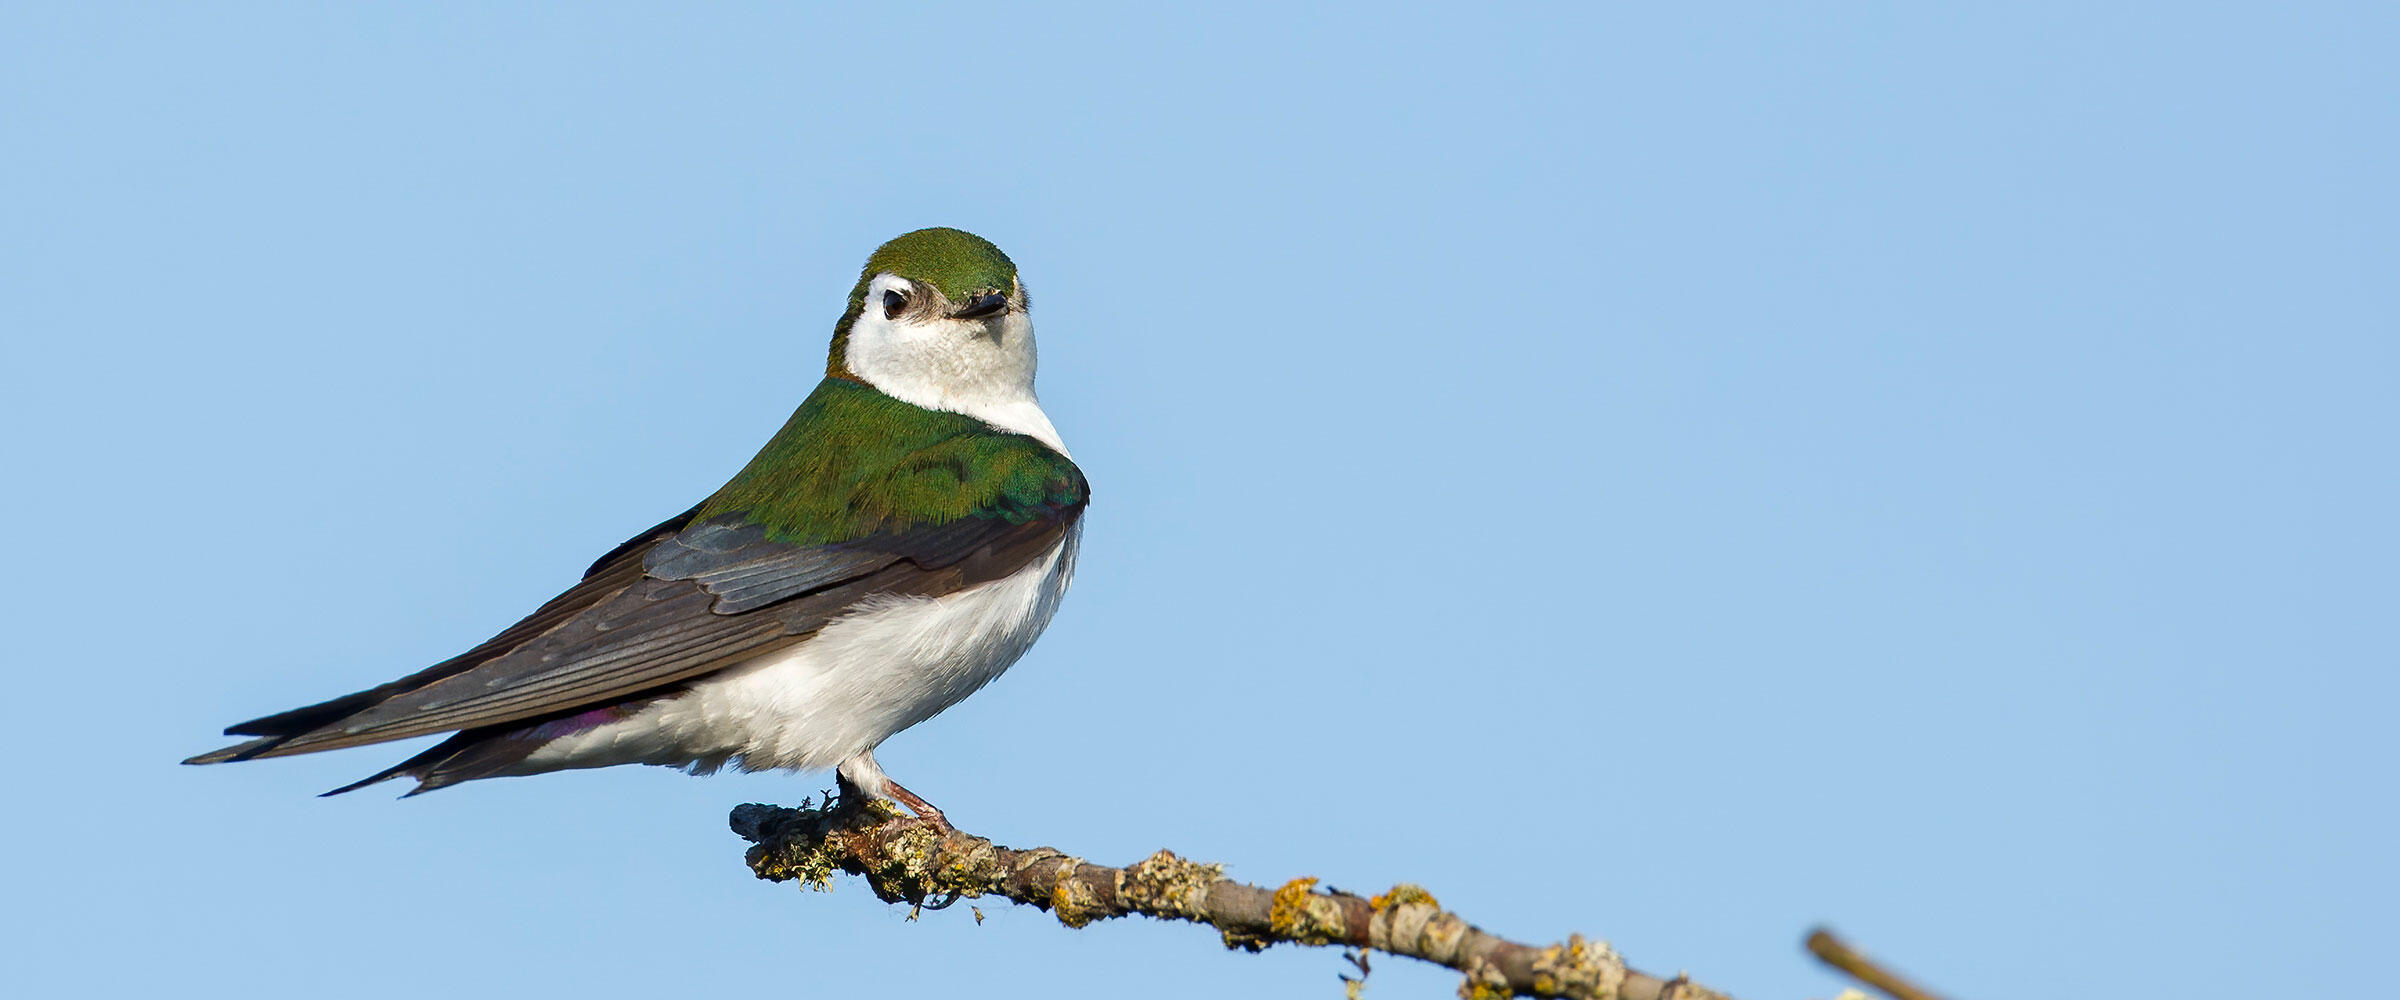 Violet-green Swallow perched on a branch.